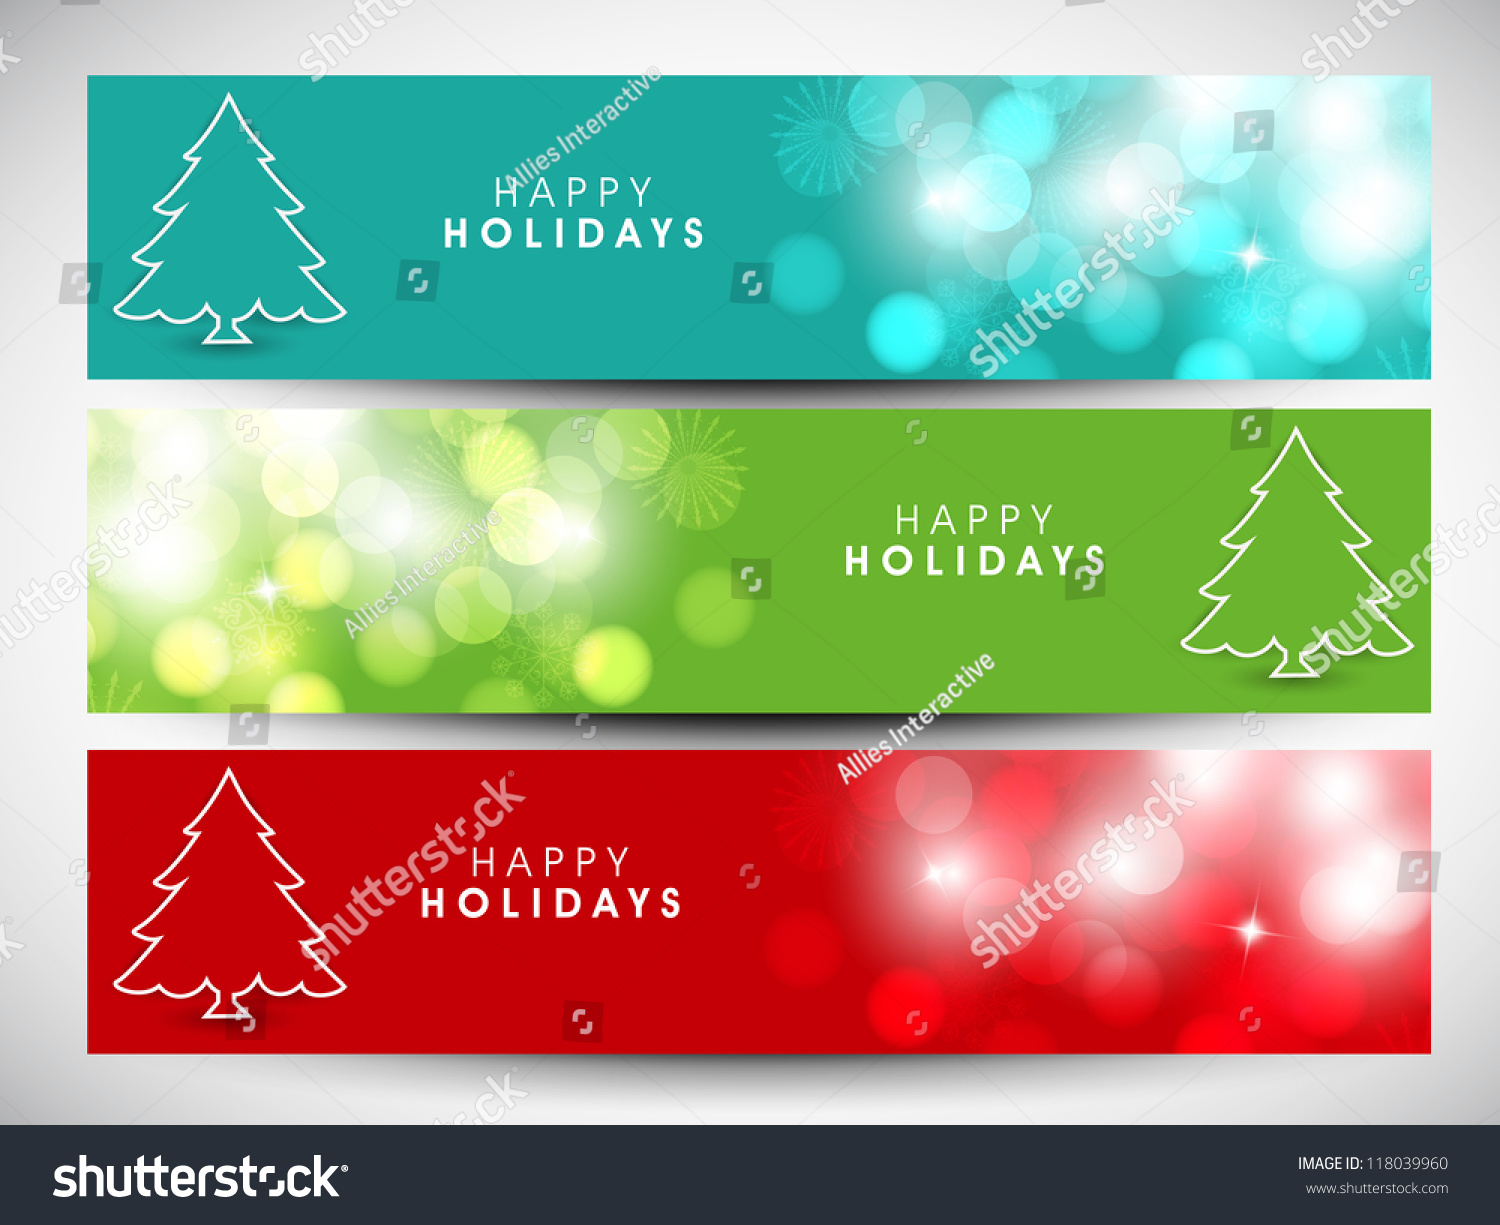 Happy Holidays Website Header Or Banner With Beautiful Snowflakes And ...